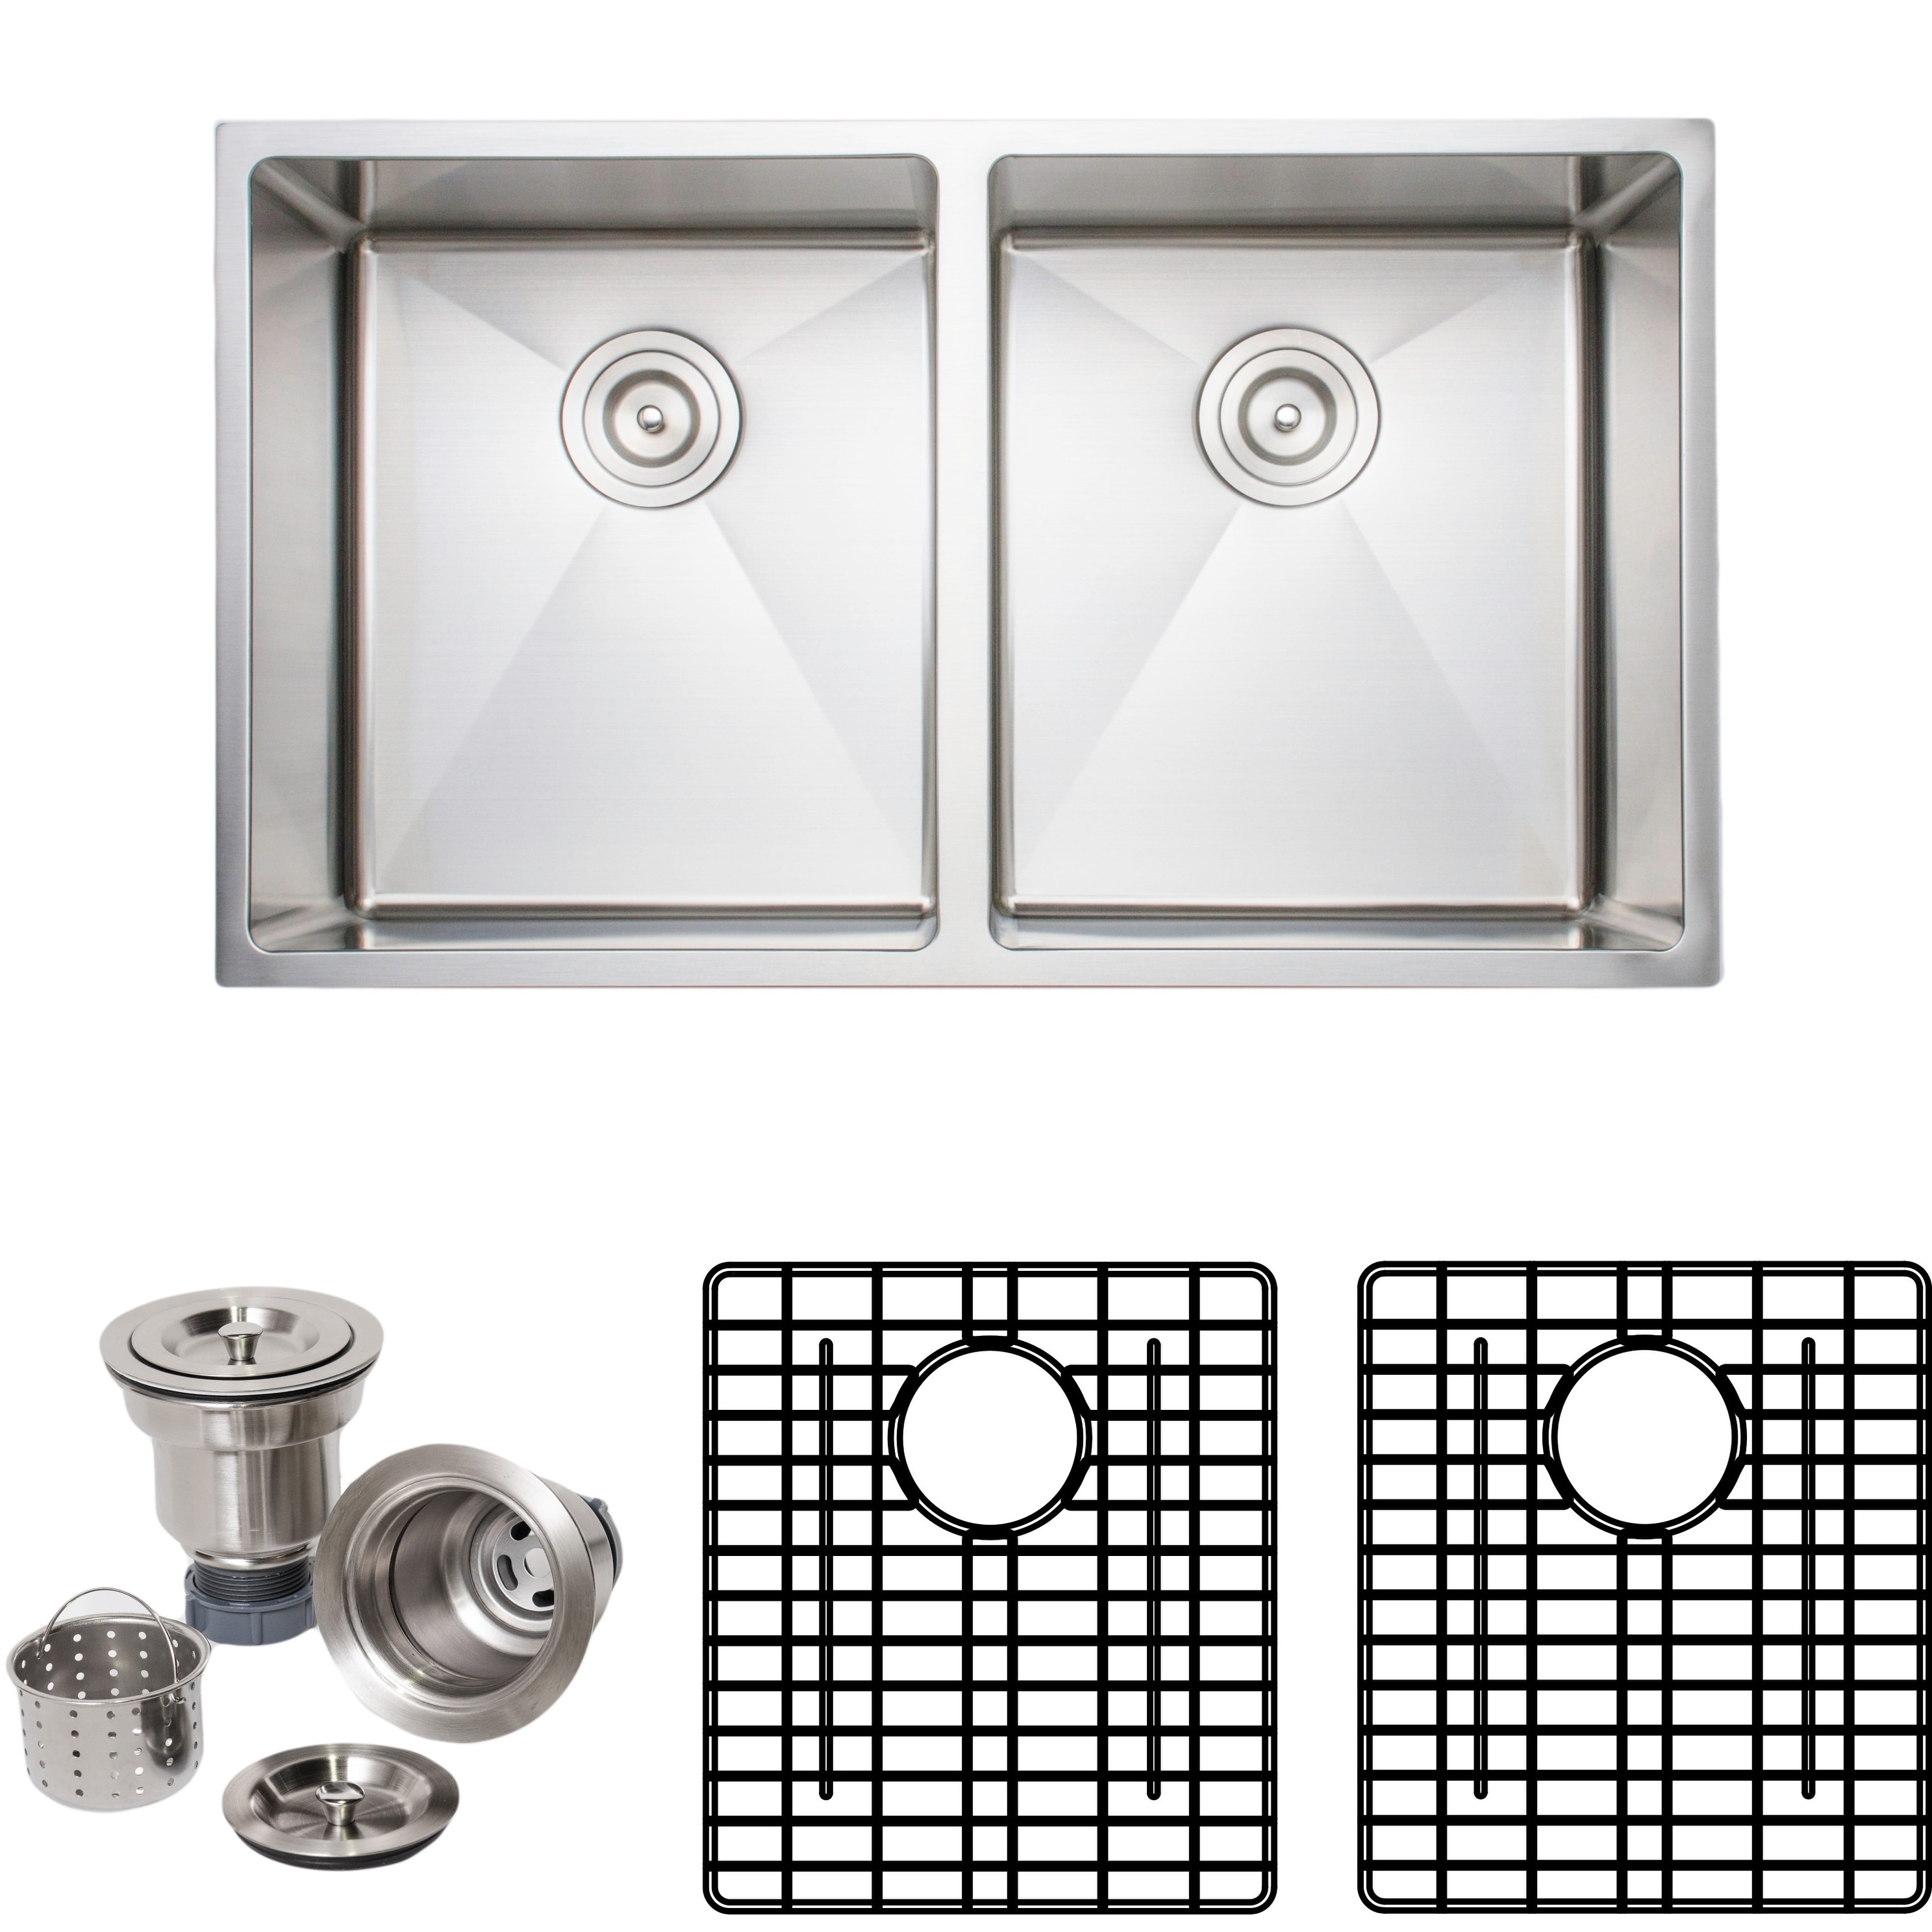 Wells Commercial Grade 16 gauge Handcrafted Double Bowl Undermount Stainless Steel Kitchen Sink Pack